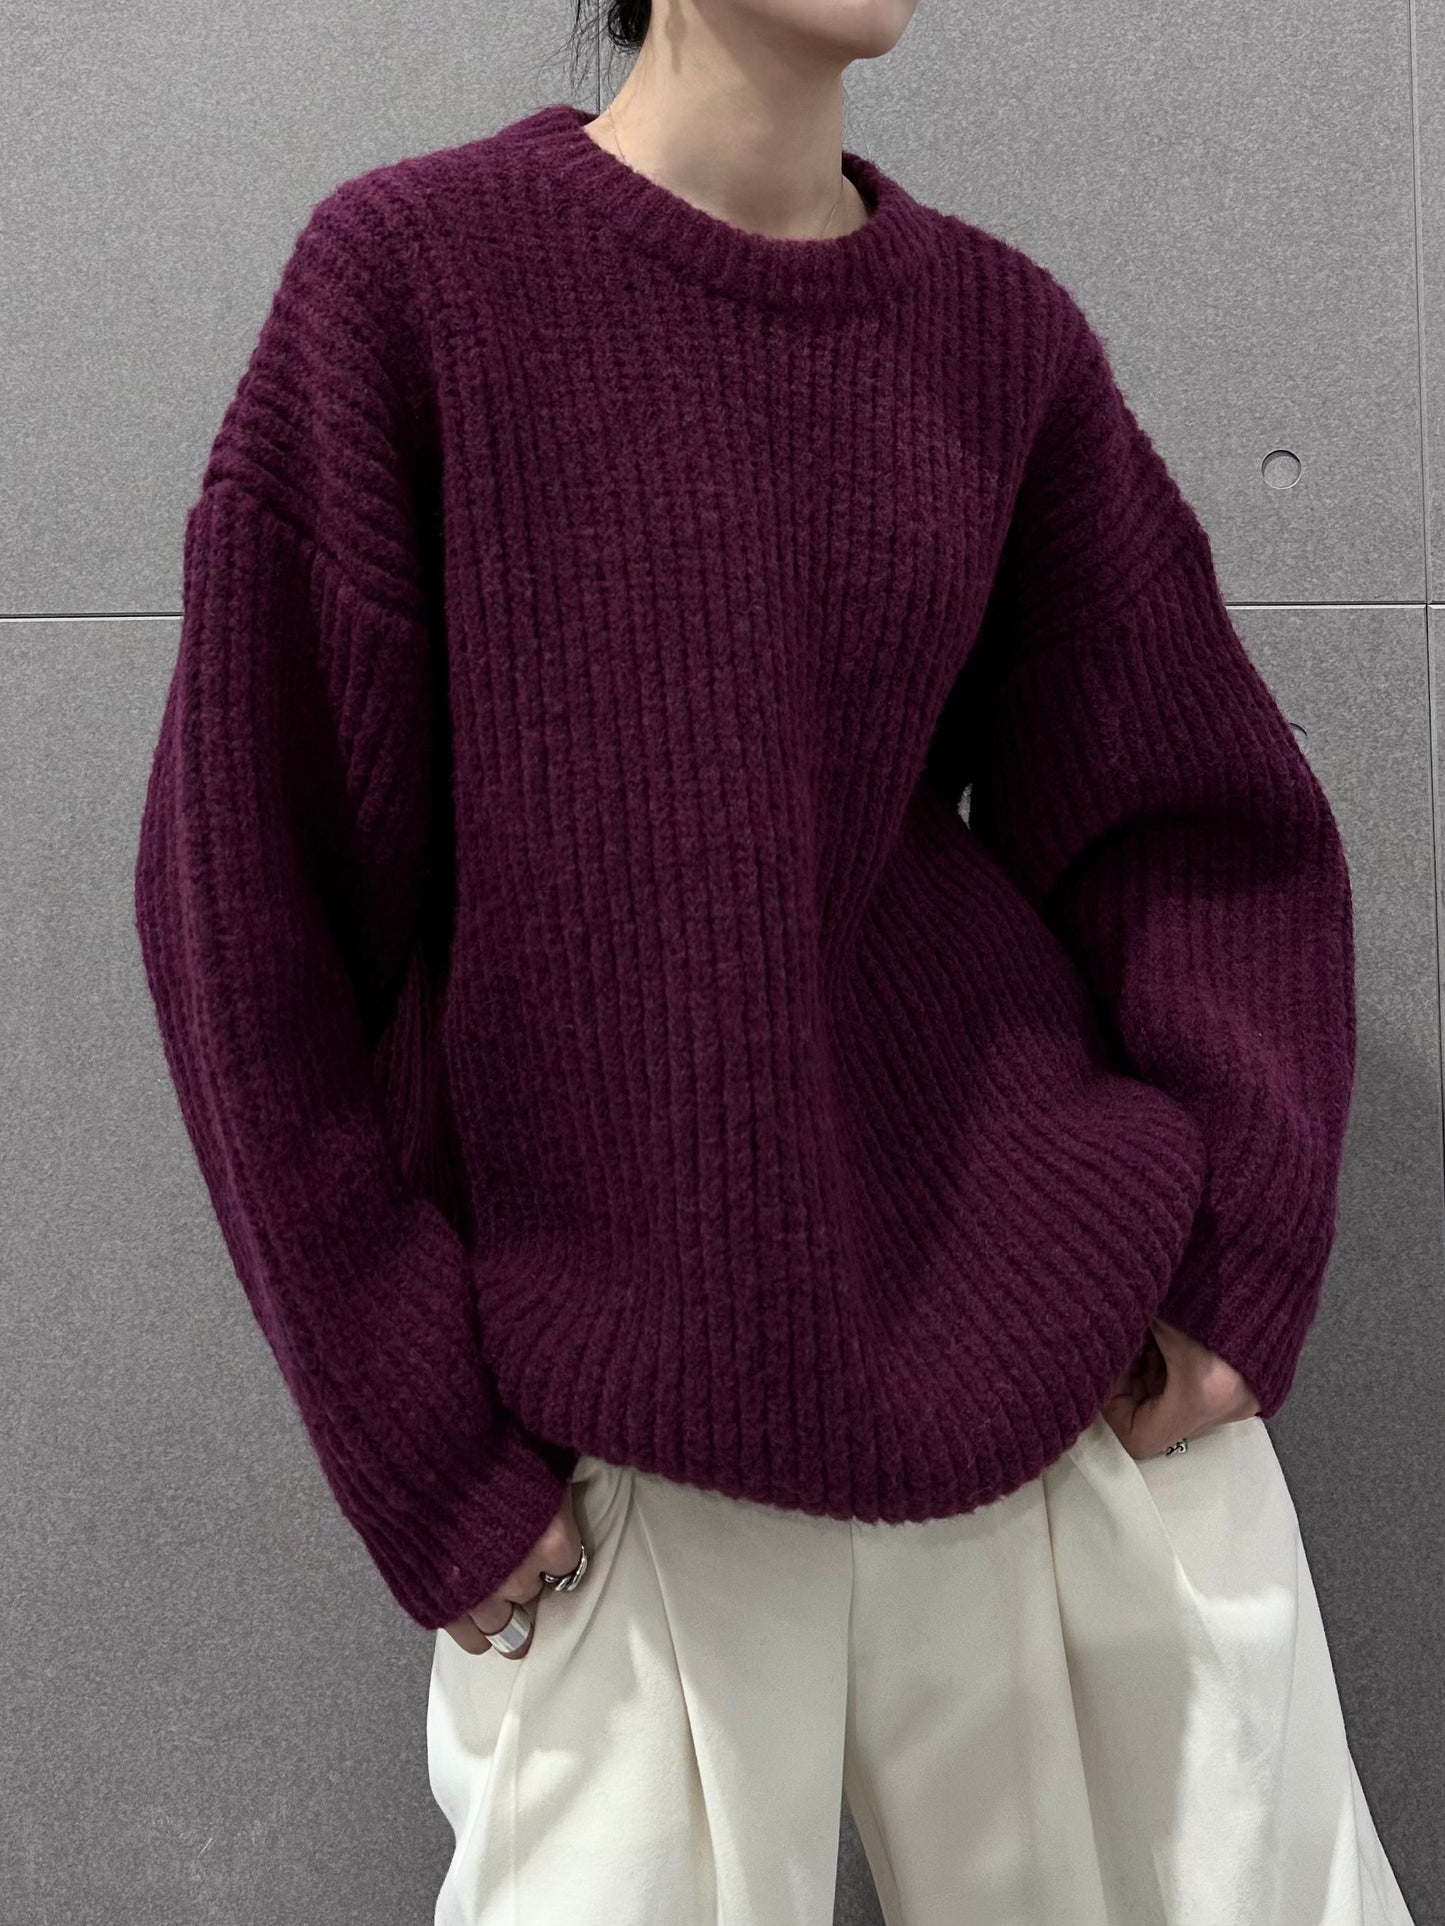 Unisex Cable Knit Sweater